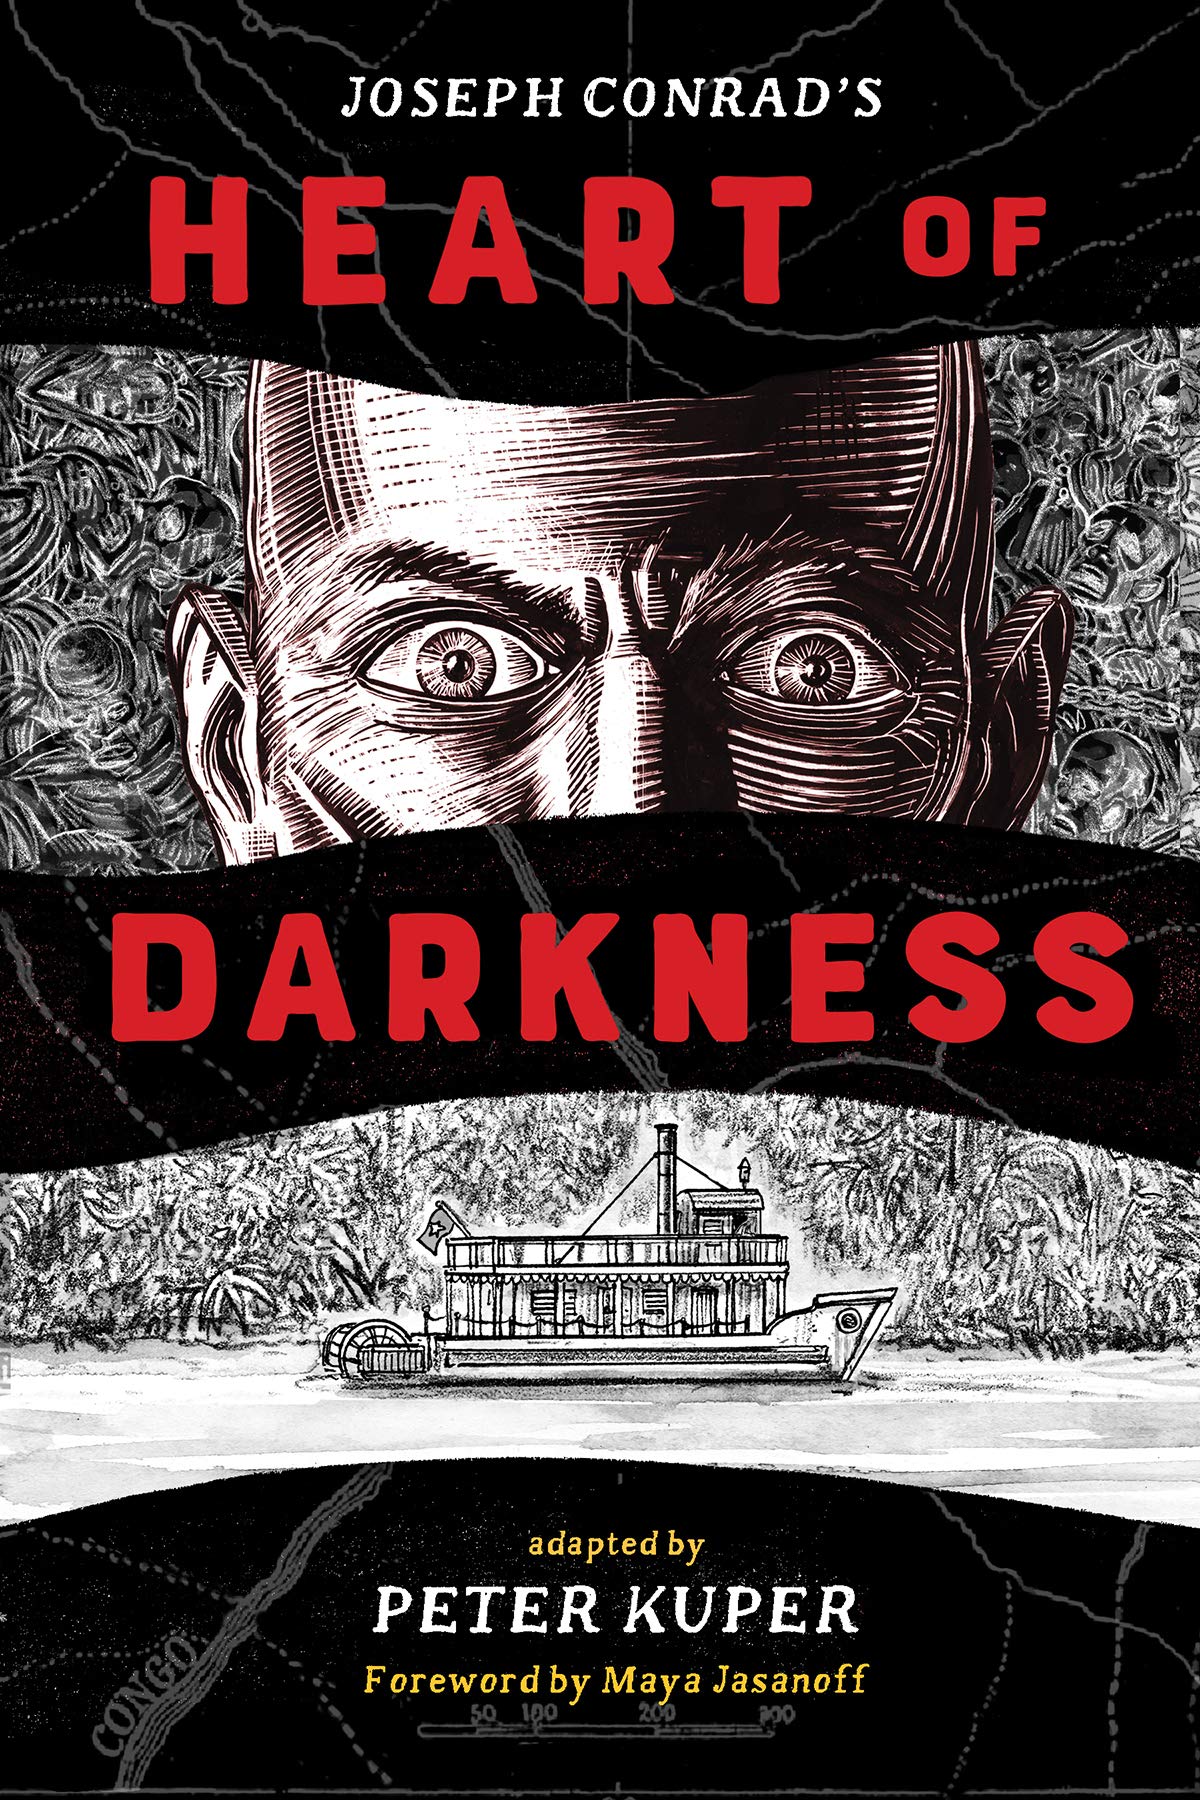 Graphic Novels for Fall 2019: Heart of Darkness